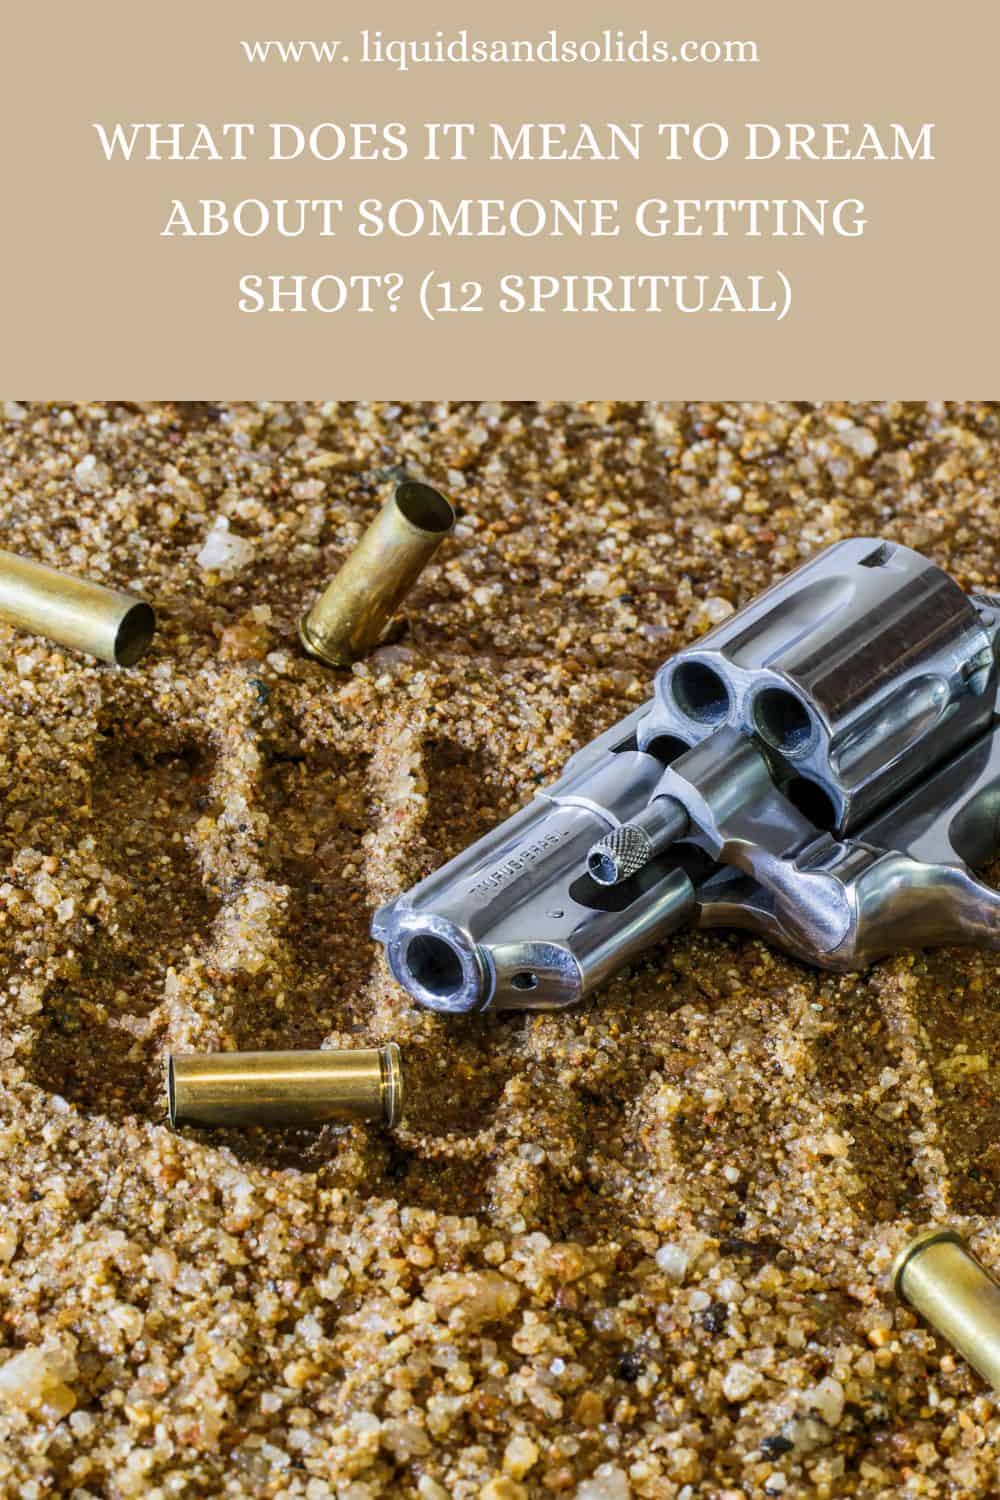 What Does It Mean To Dream About Someone Getting Shot? (12 Spiritual)